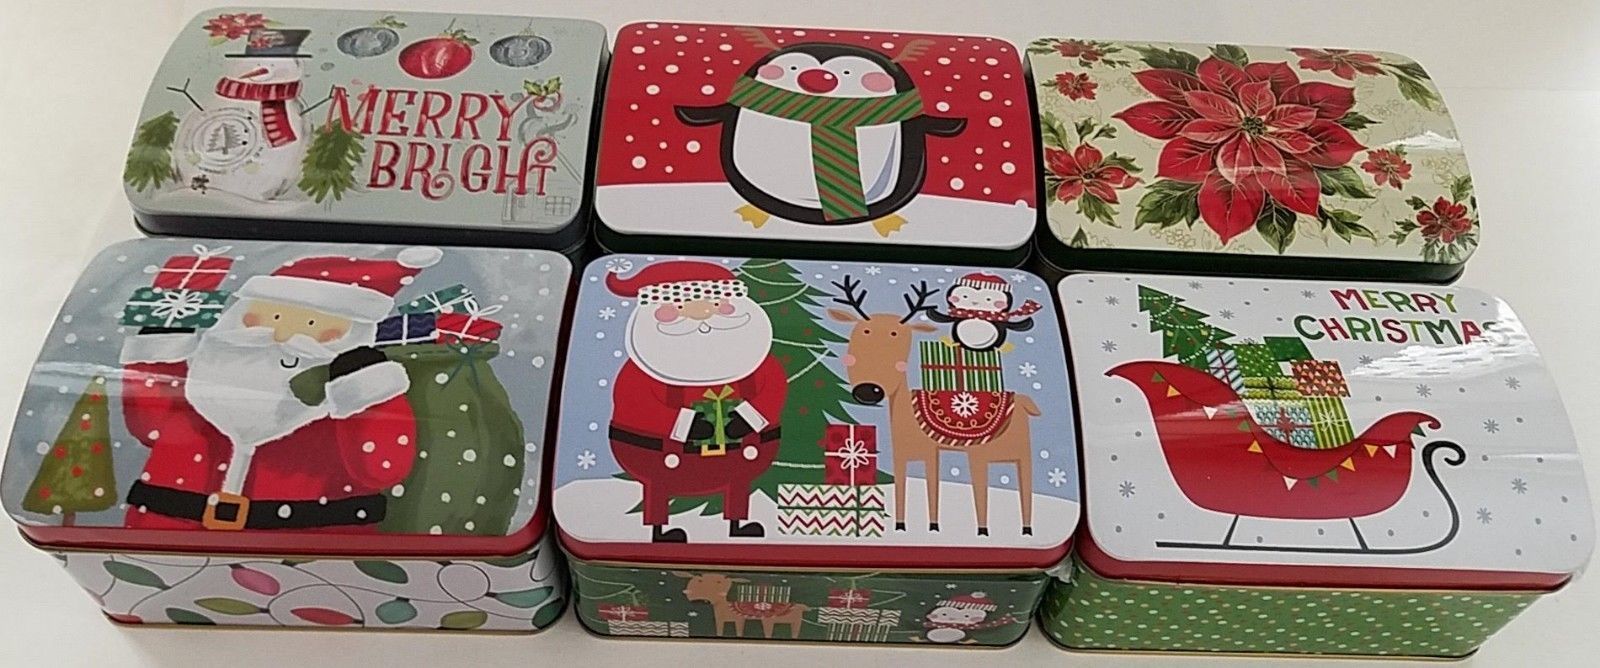 Size/Design CHRISTMAS HOLIDAY COOKIE TINS Hinged Lids Nesting Gift Boxes SELECT 